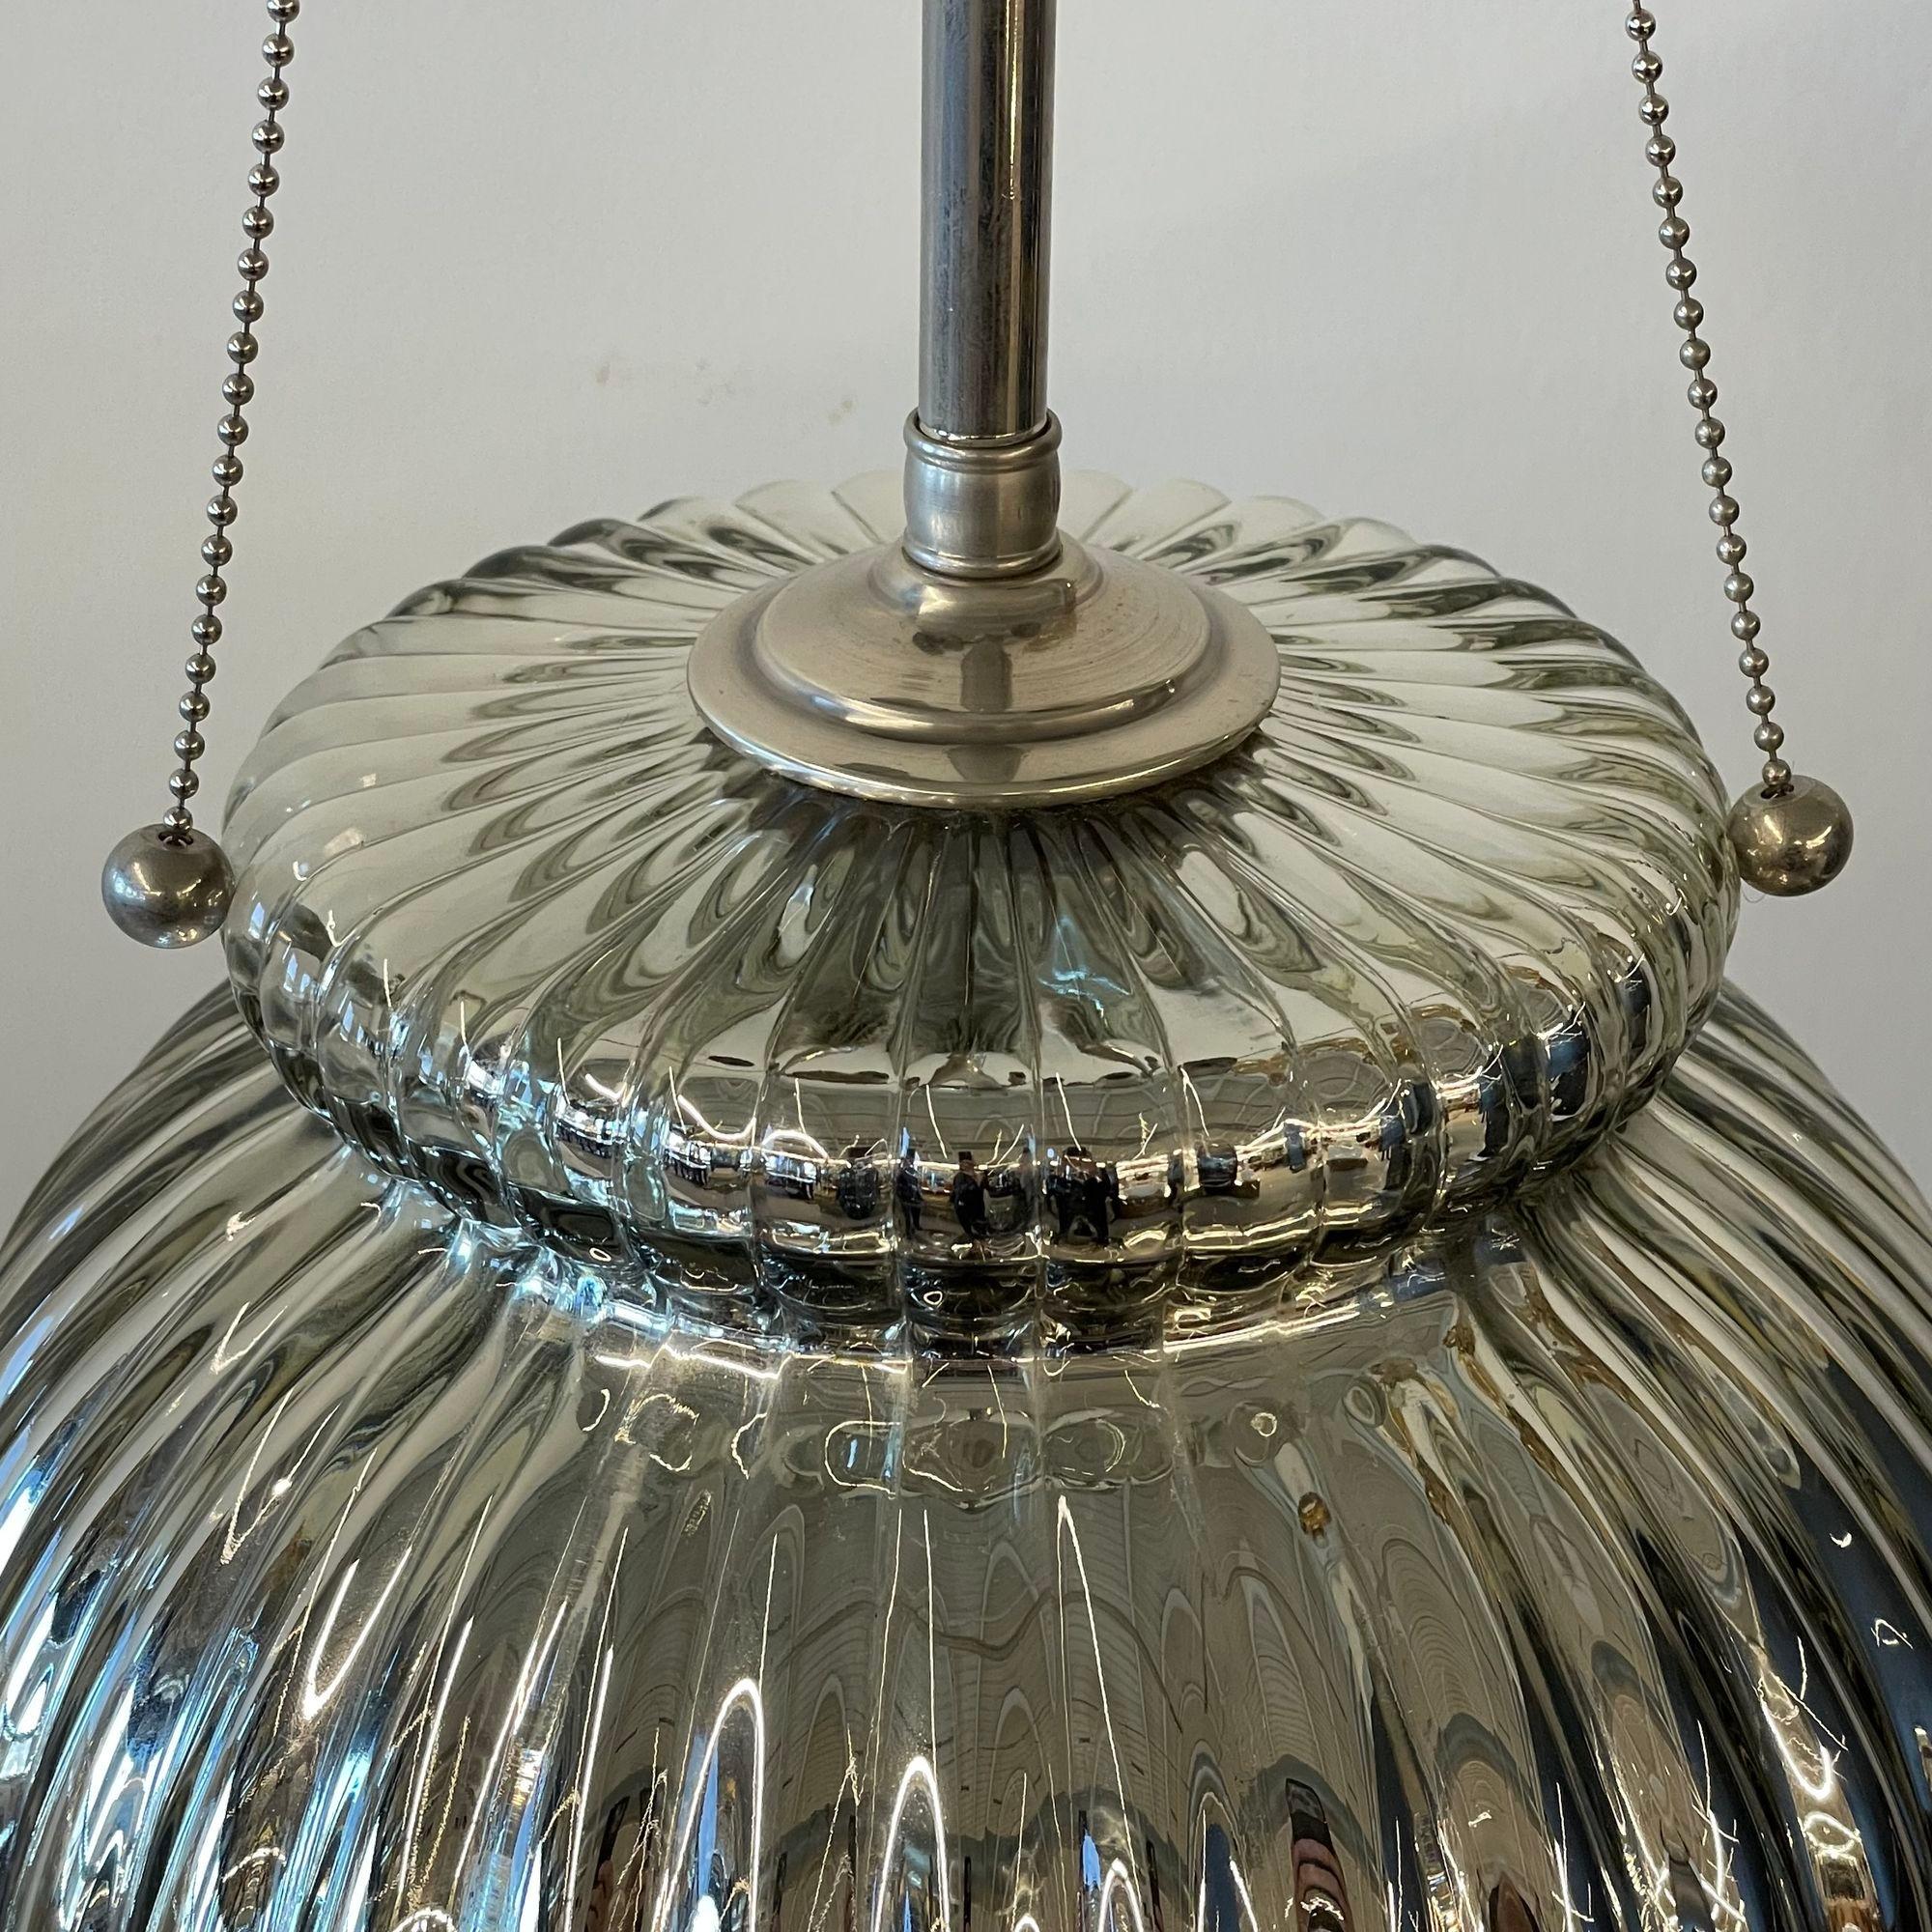 Pair of Mid-Century Modern Silver Table Lamps, Mercury Glass, Brass, Urn-Shaped For Sale 1